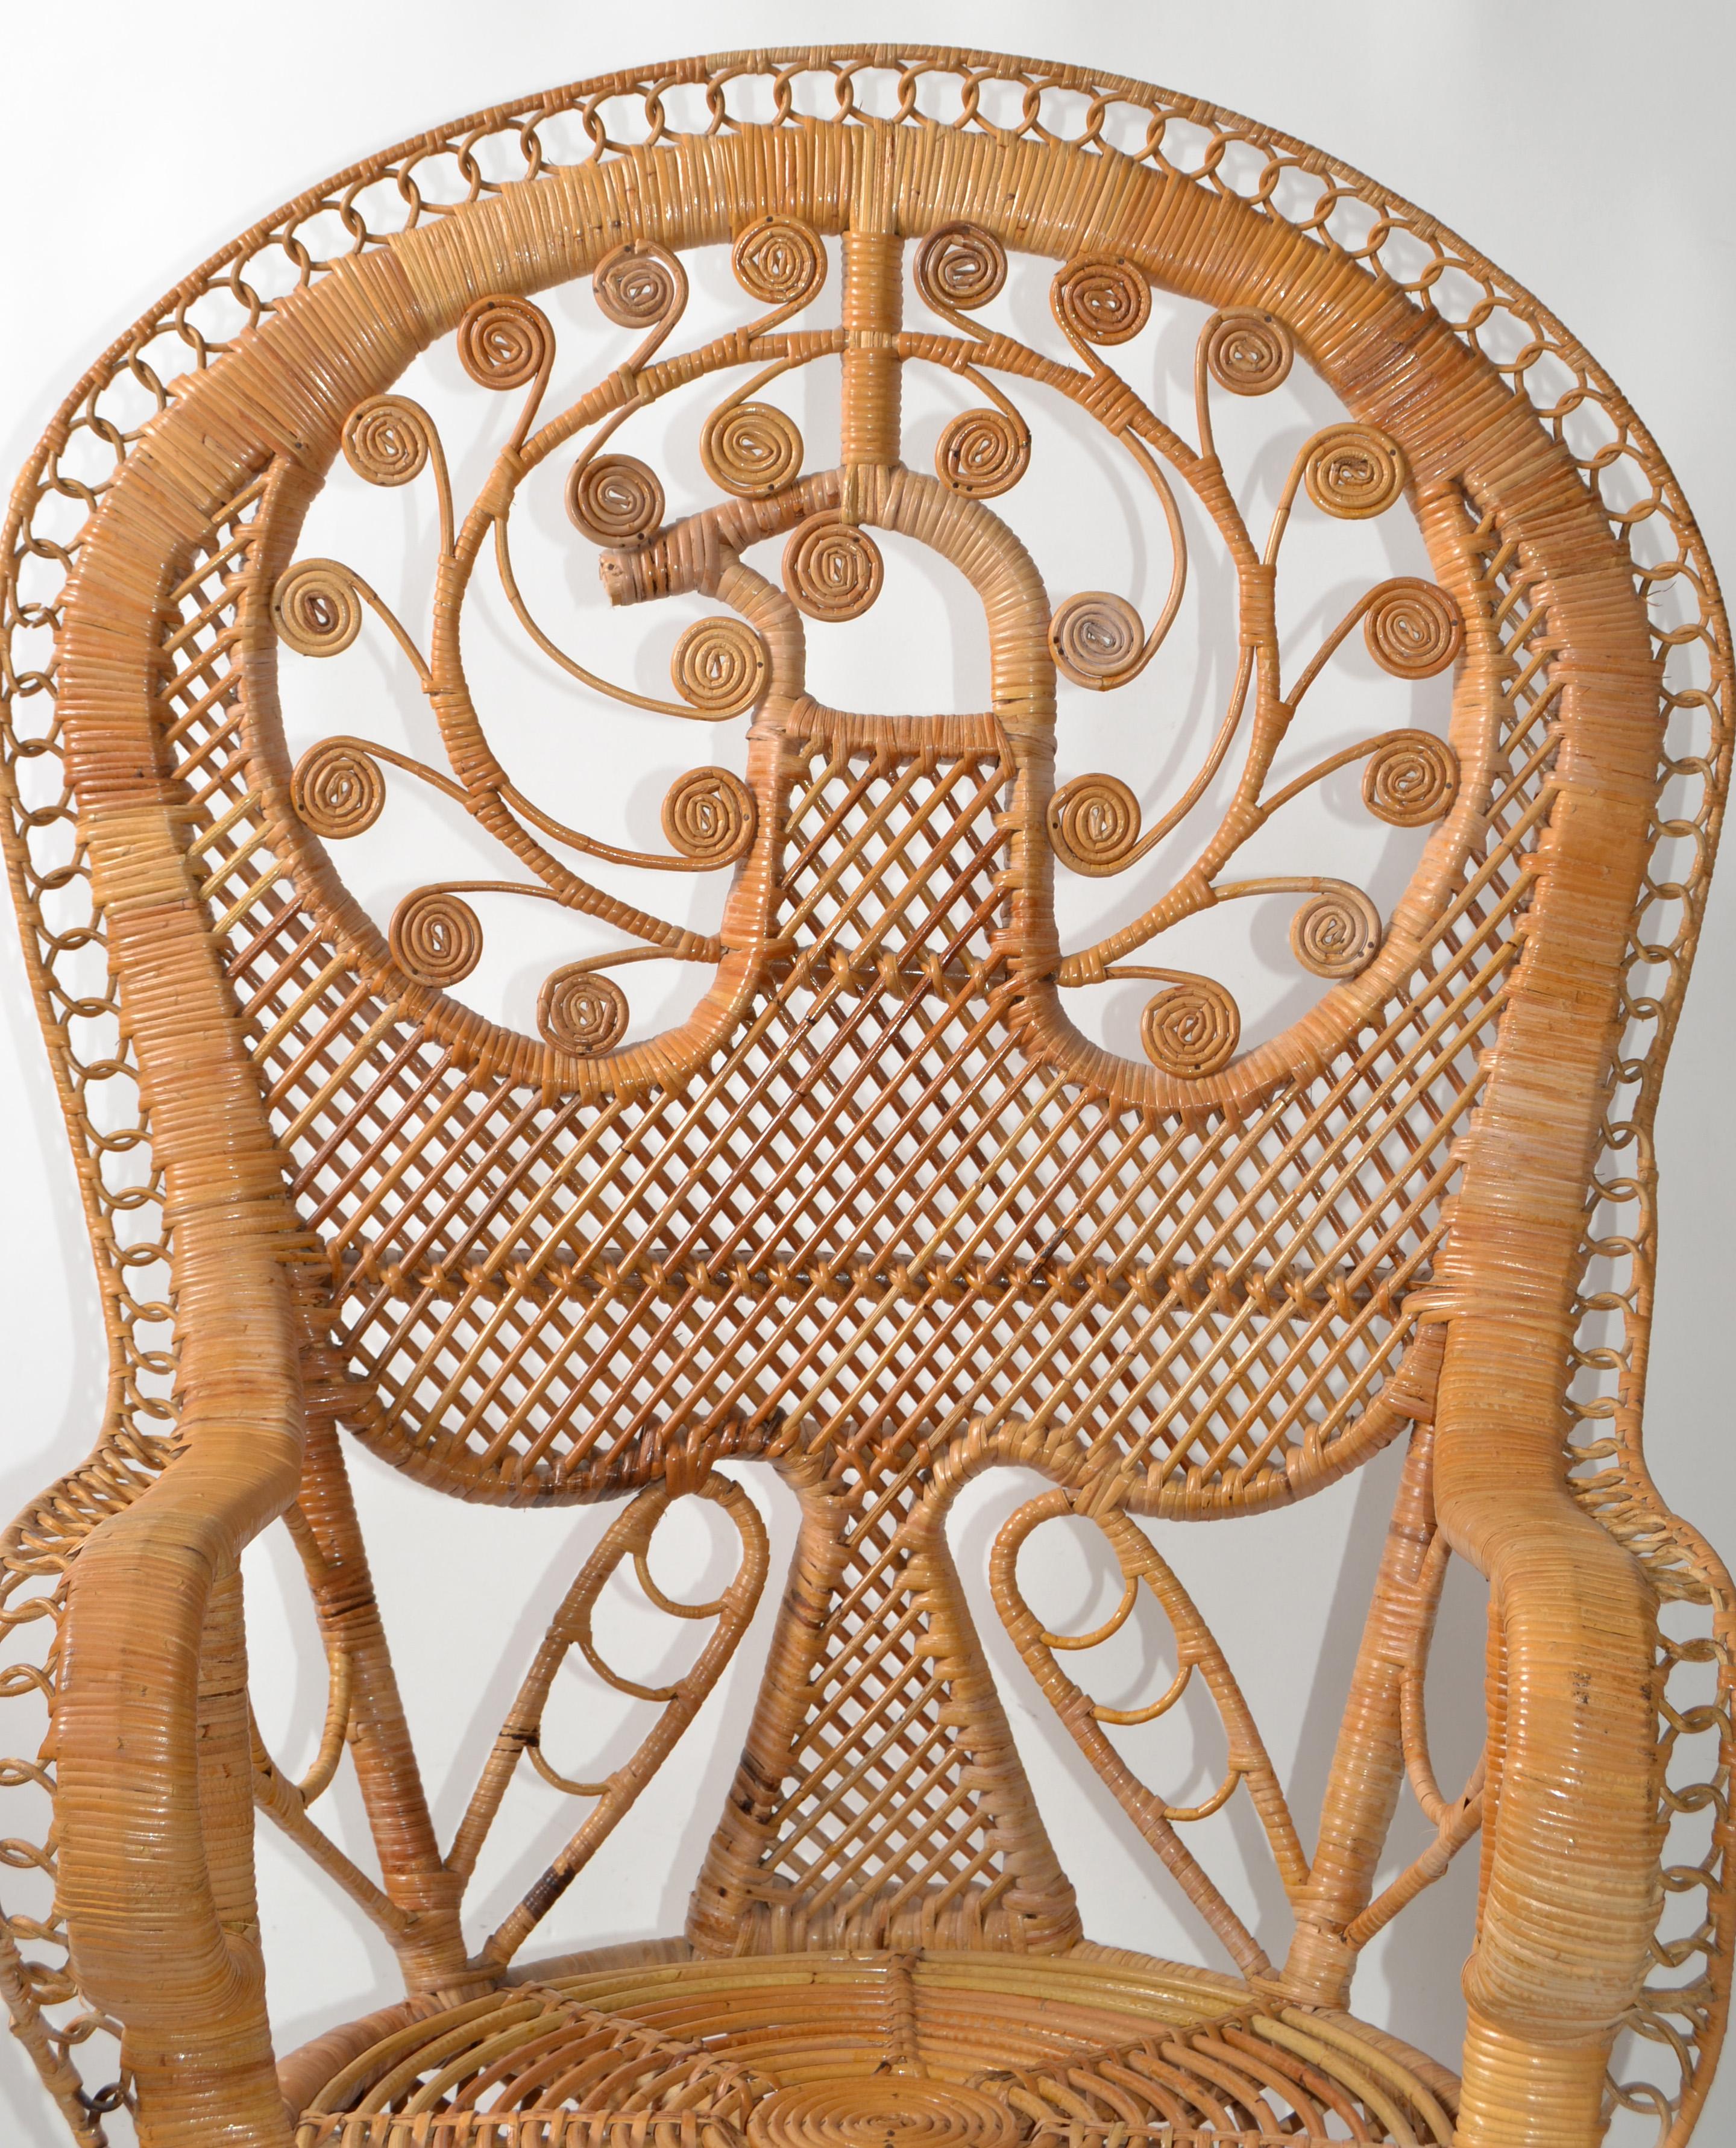 Coastal Vintage Round Rattan Accent Table Hand-Woven Wicker Caning Peacock Chair In Good Condition For Sale In Miami, FL